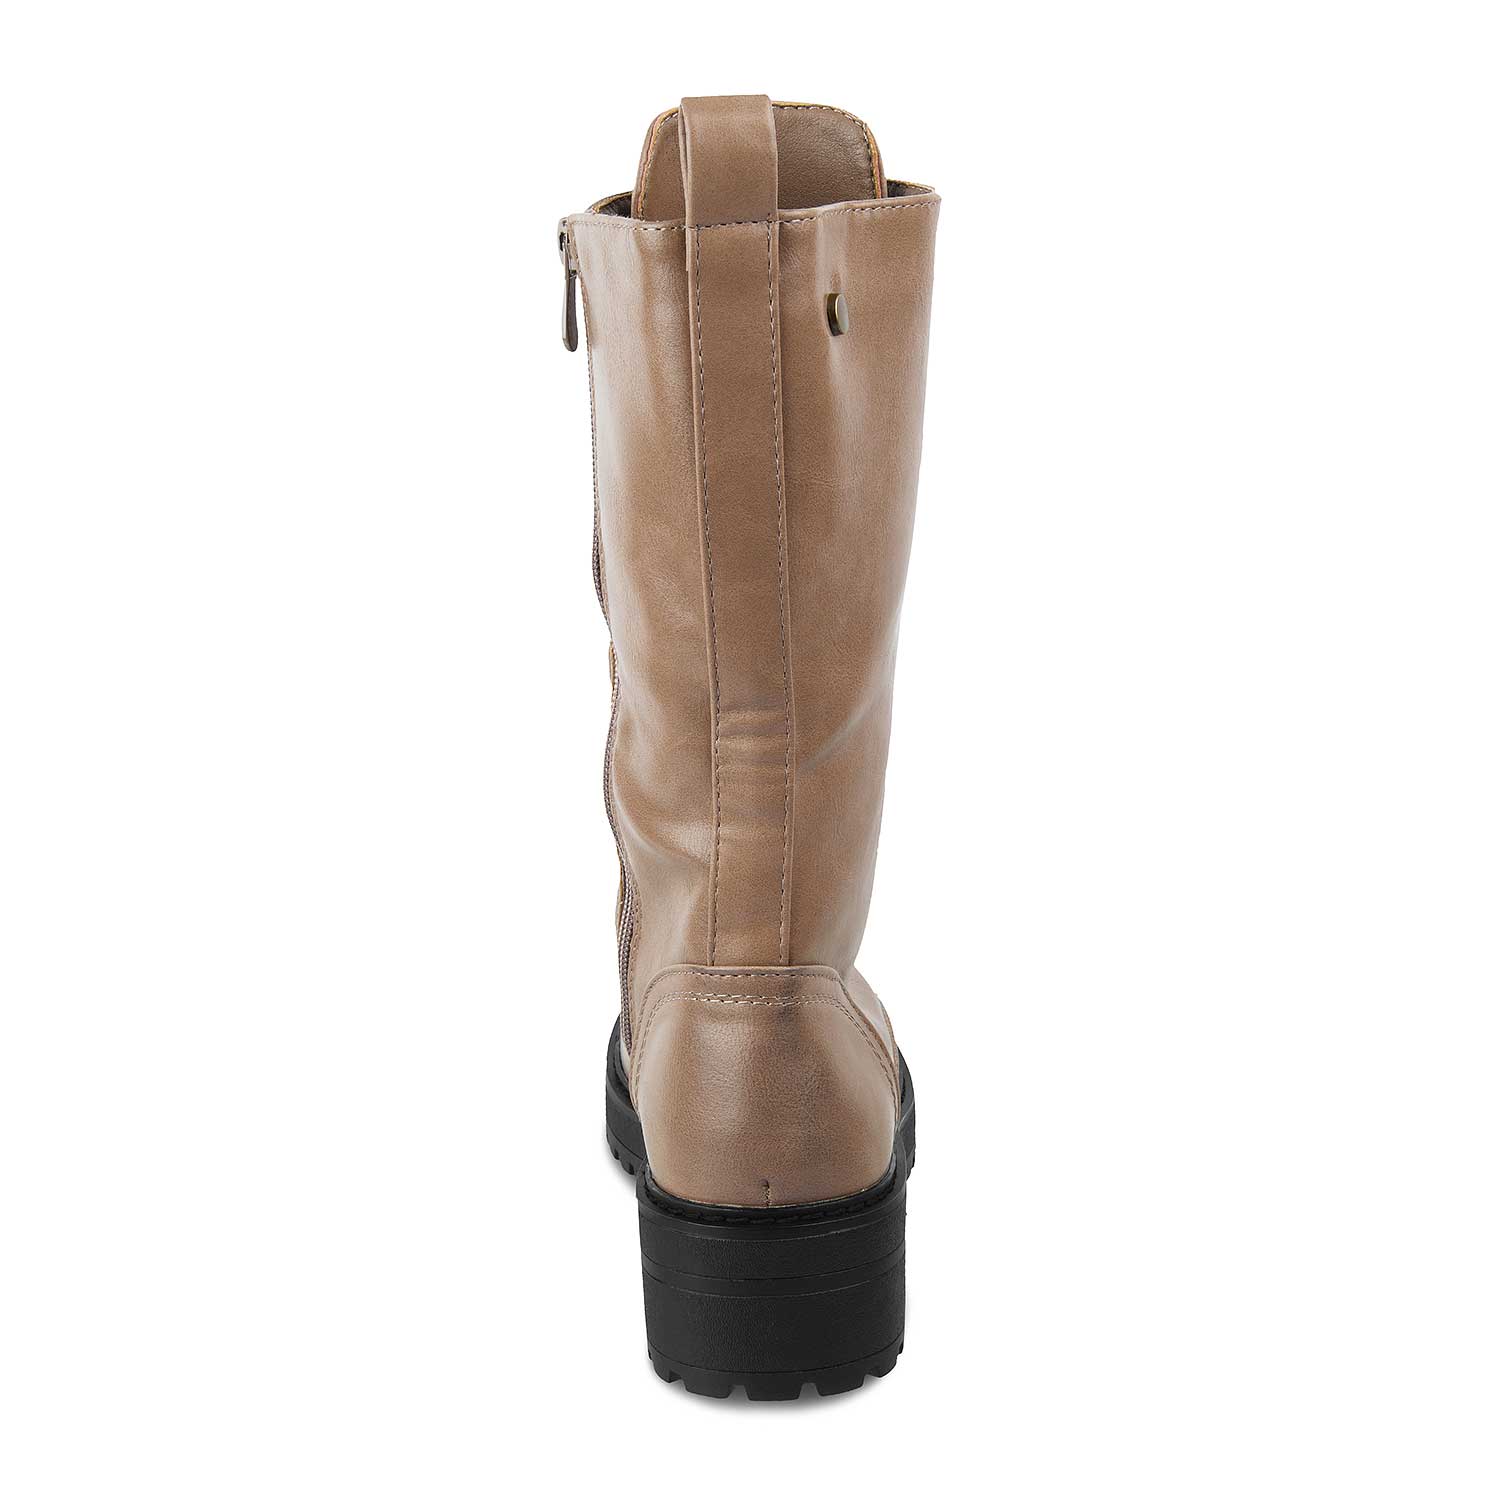 The White Tan Women's Knee-length Boots Tresmode